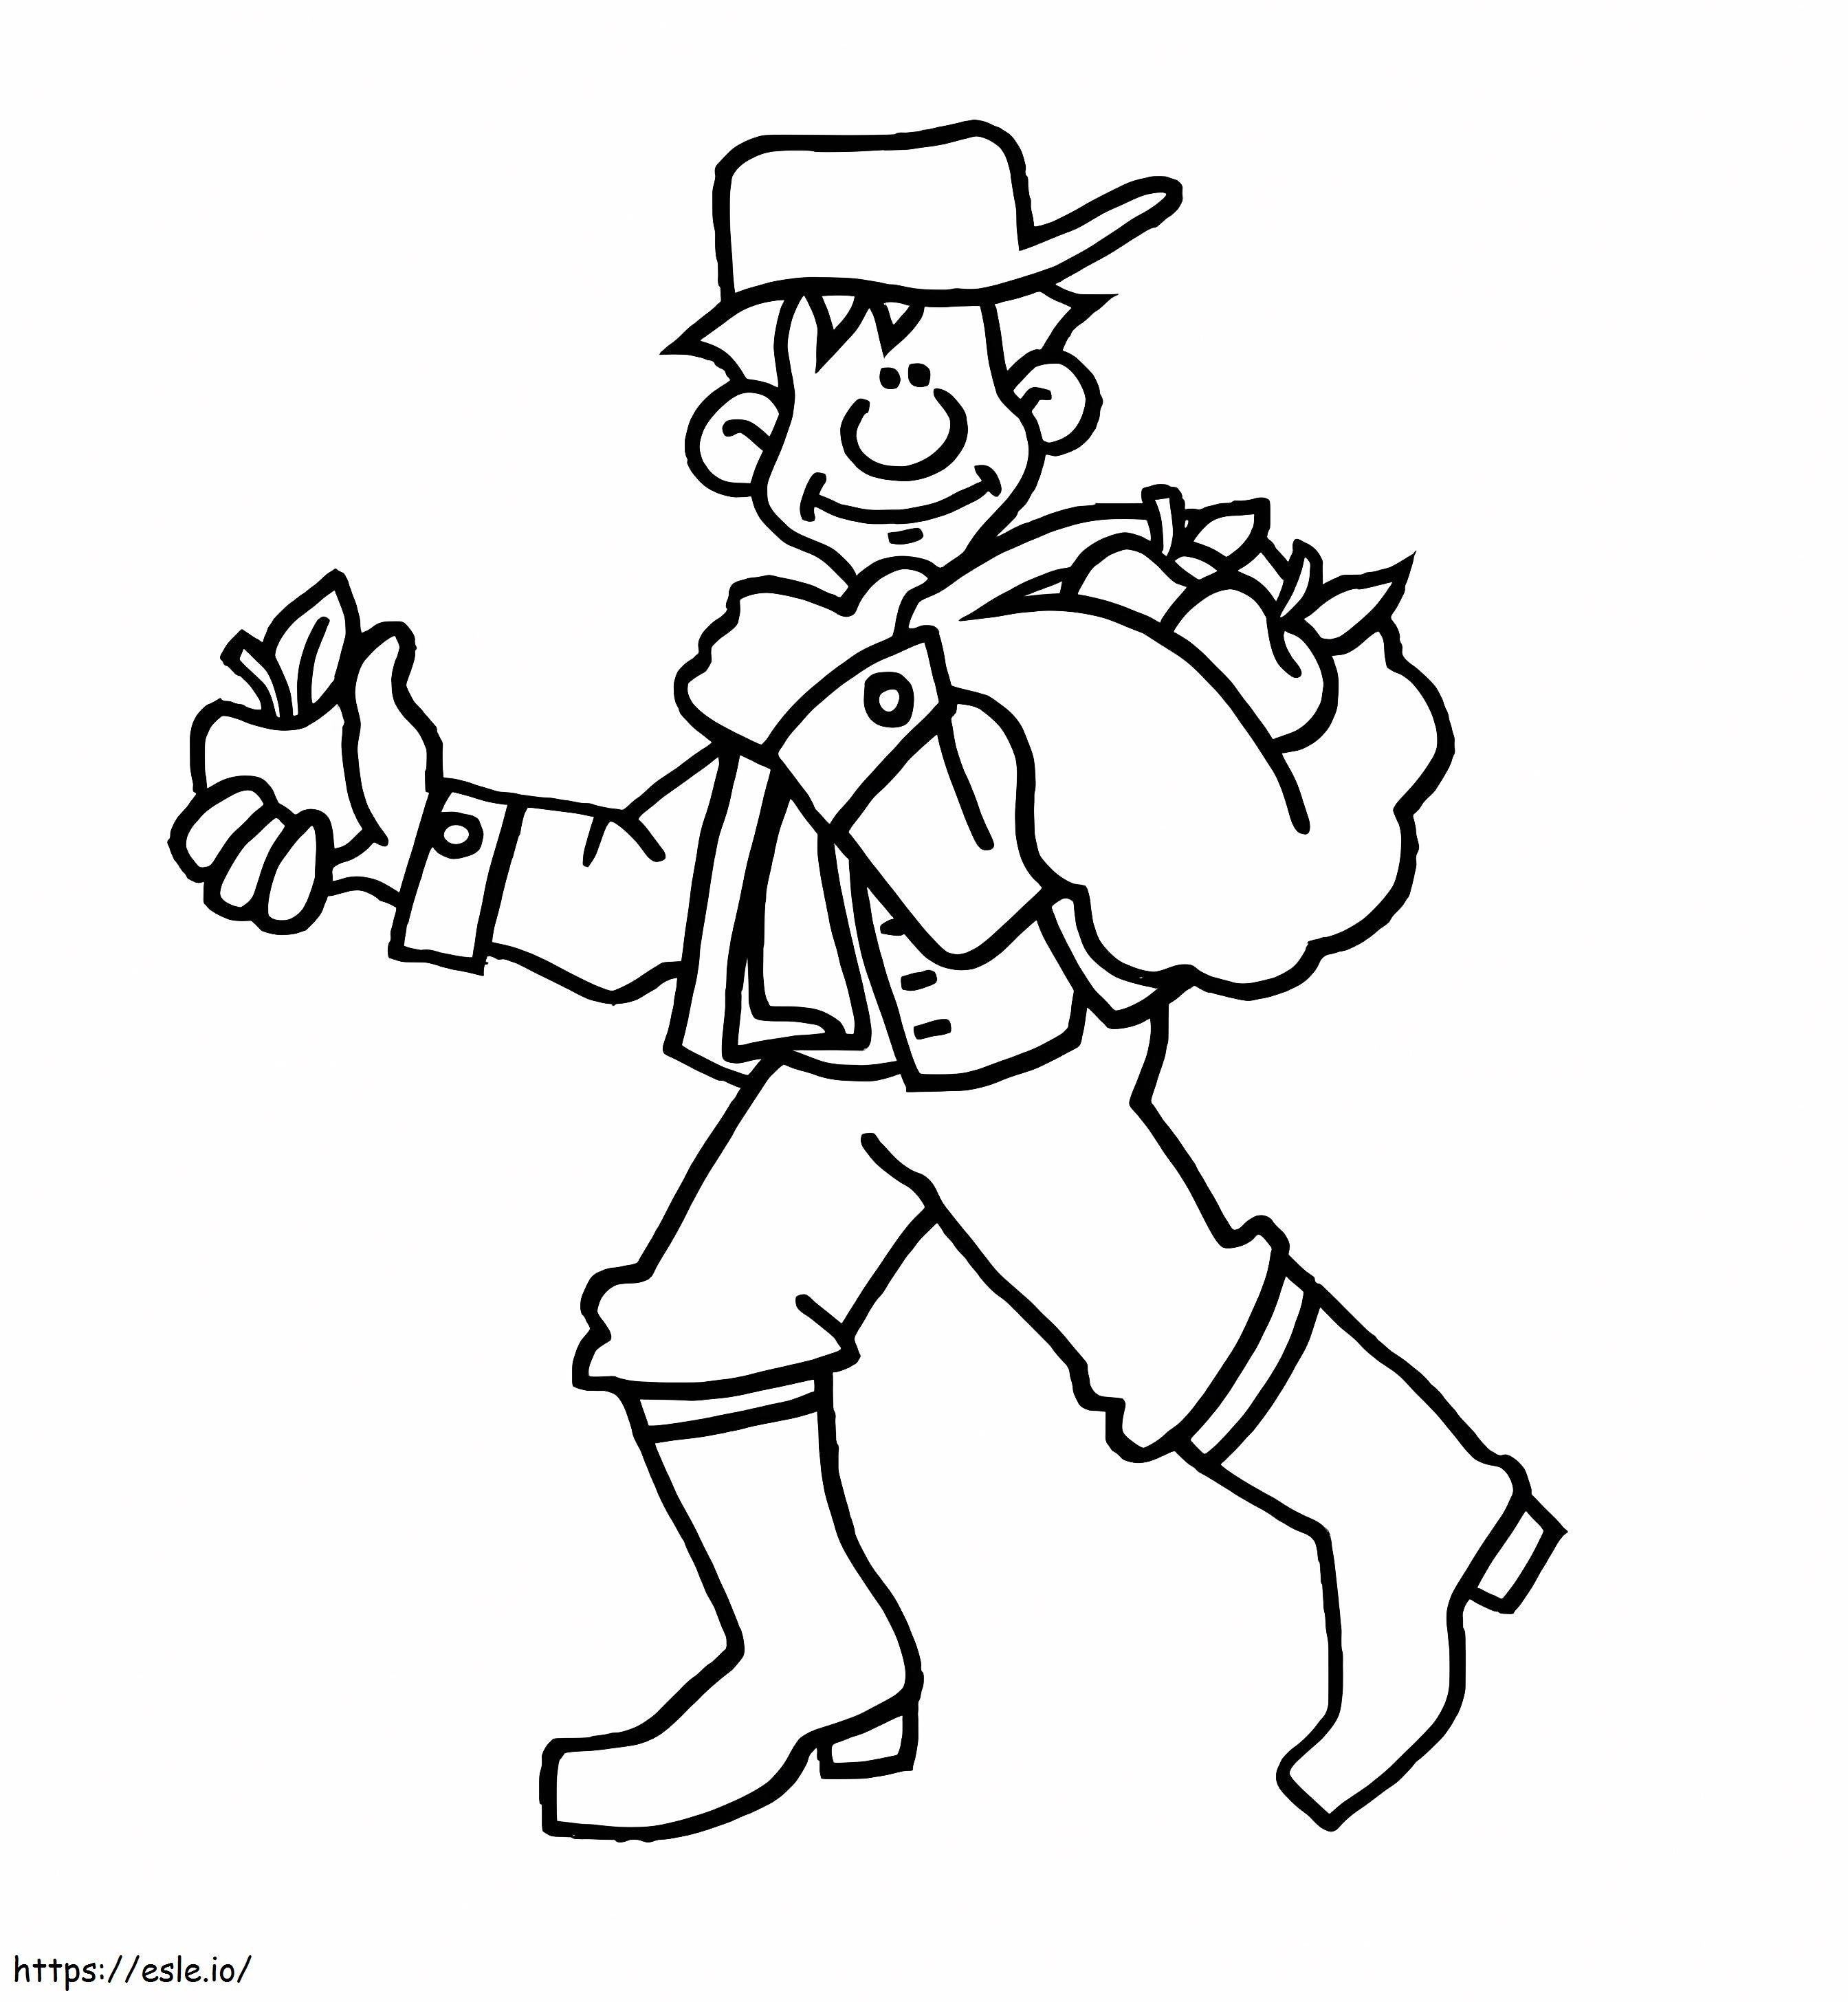 Coloriage Johnny Appleseed souriant à imprimer dessin